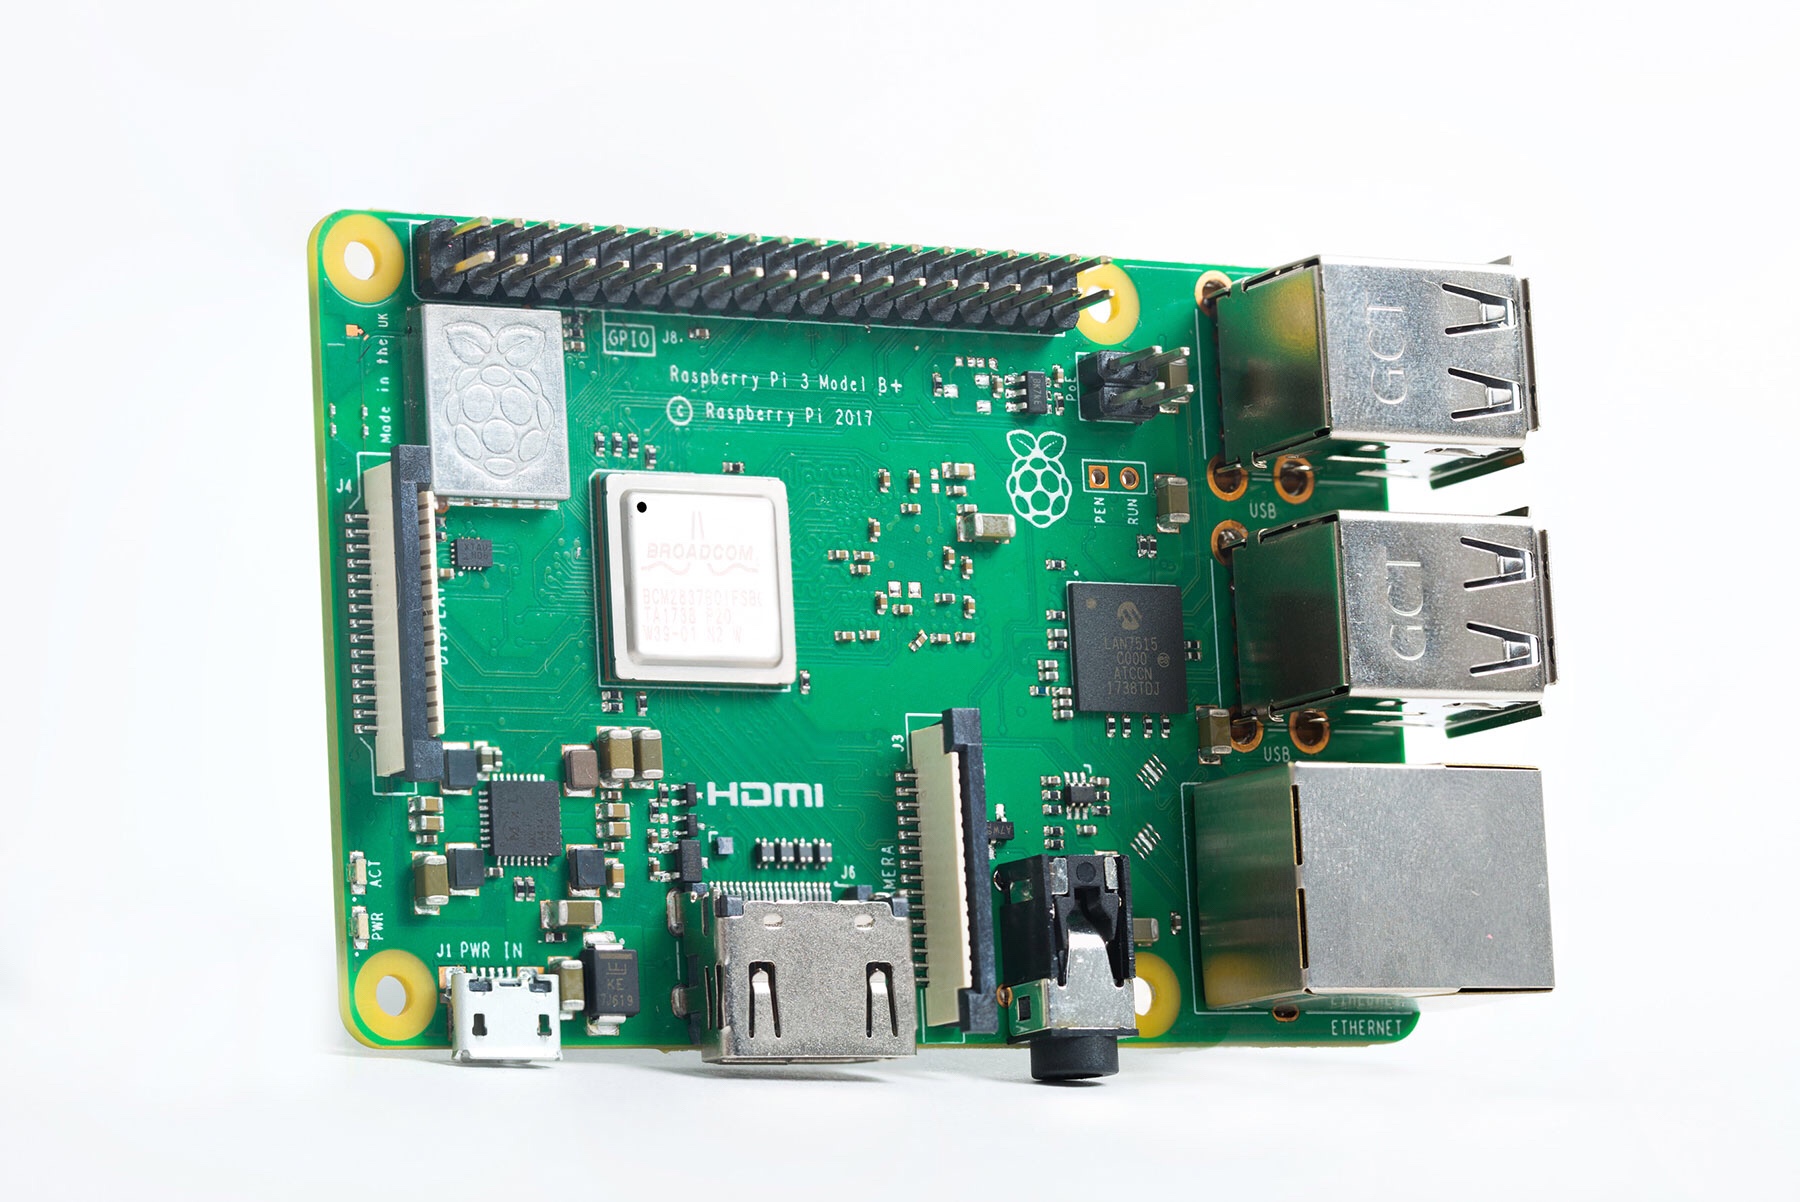 New upgrades to Raspberry Pi 3 bring more power and faster networking